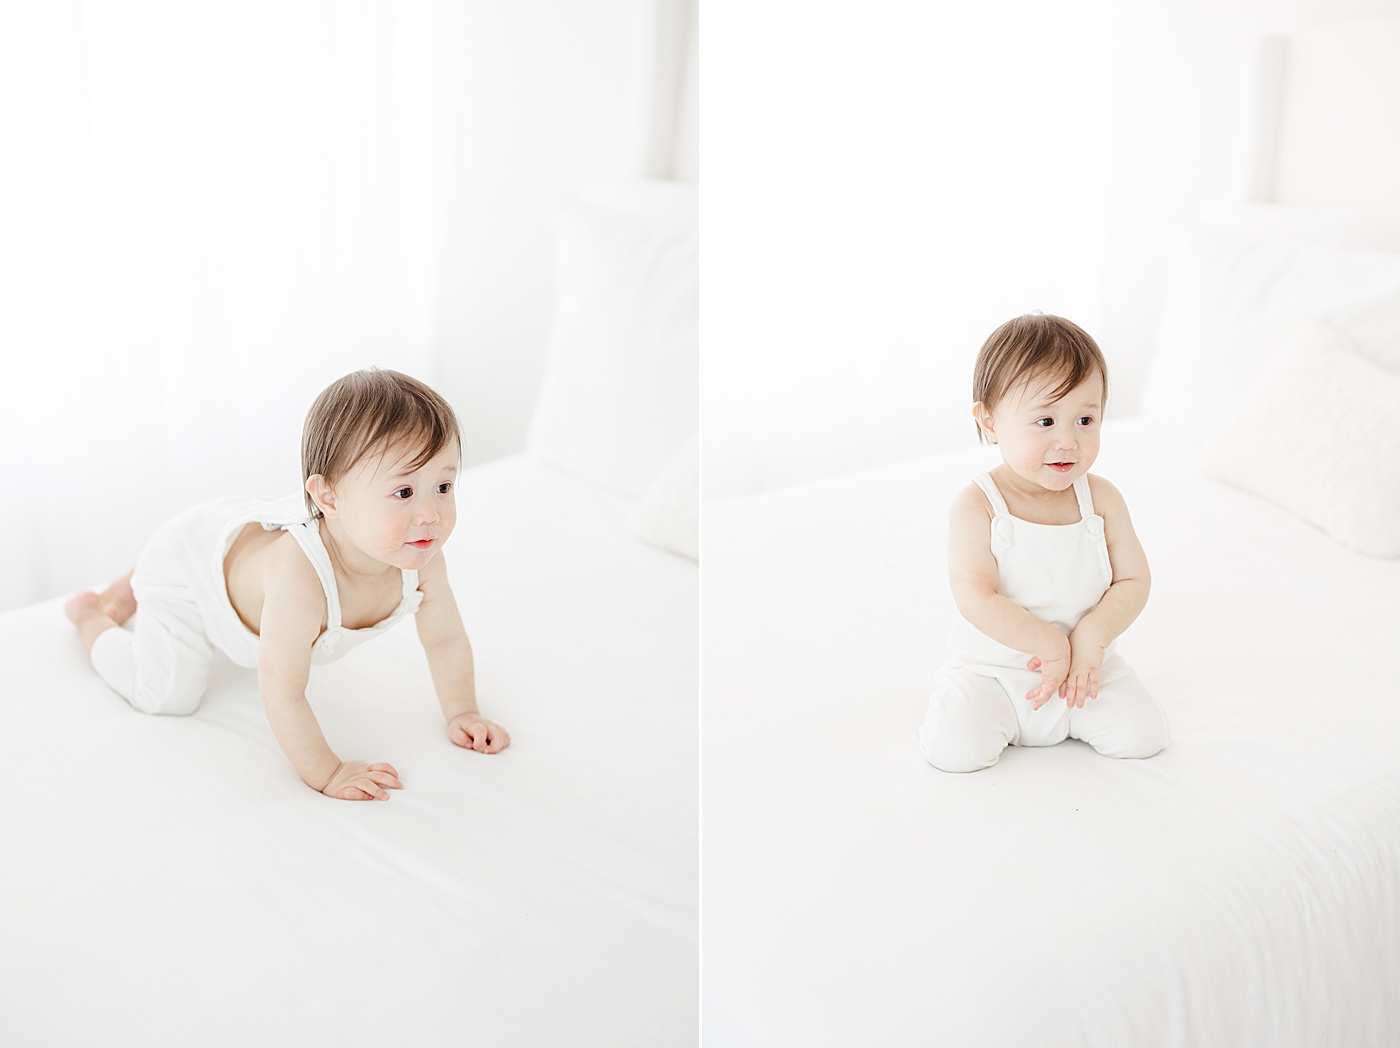 One year old playing on bed during first birthday photoshoot with Kristin Wood Photography.